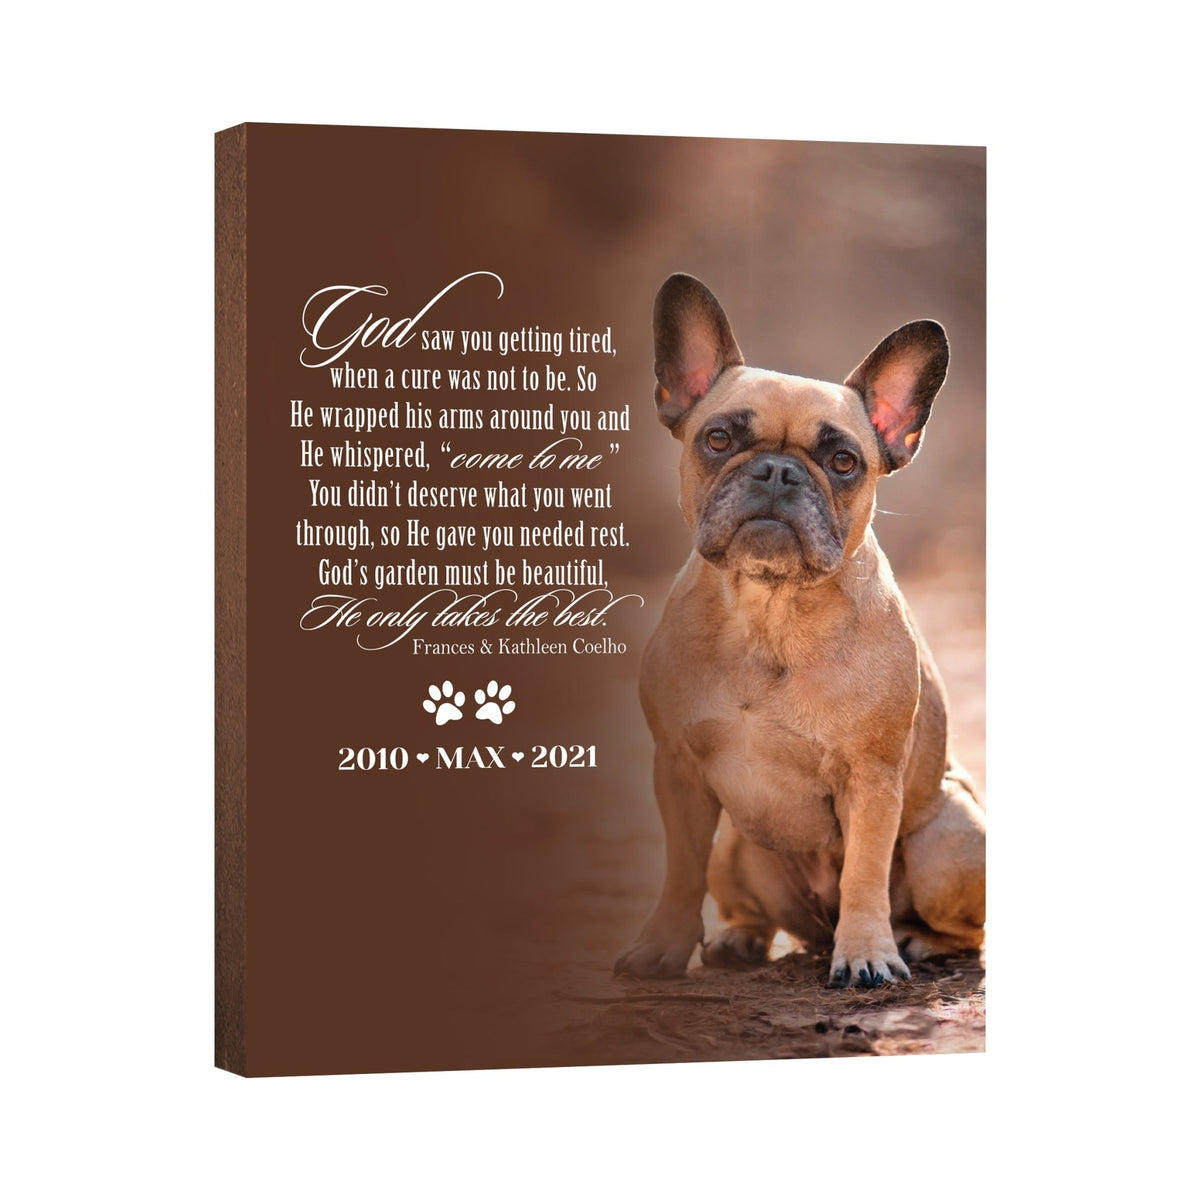 Pet Memorial Custom Photo Wall Plaque Décor - God Saw You Getting Tired - LifeSong Milestones